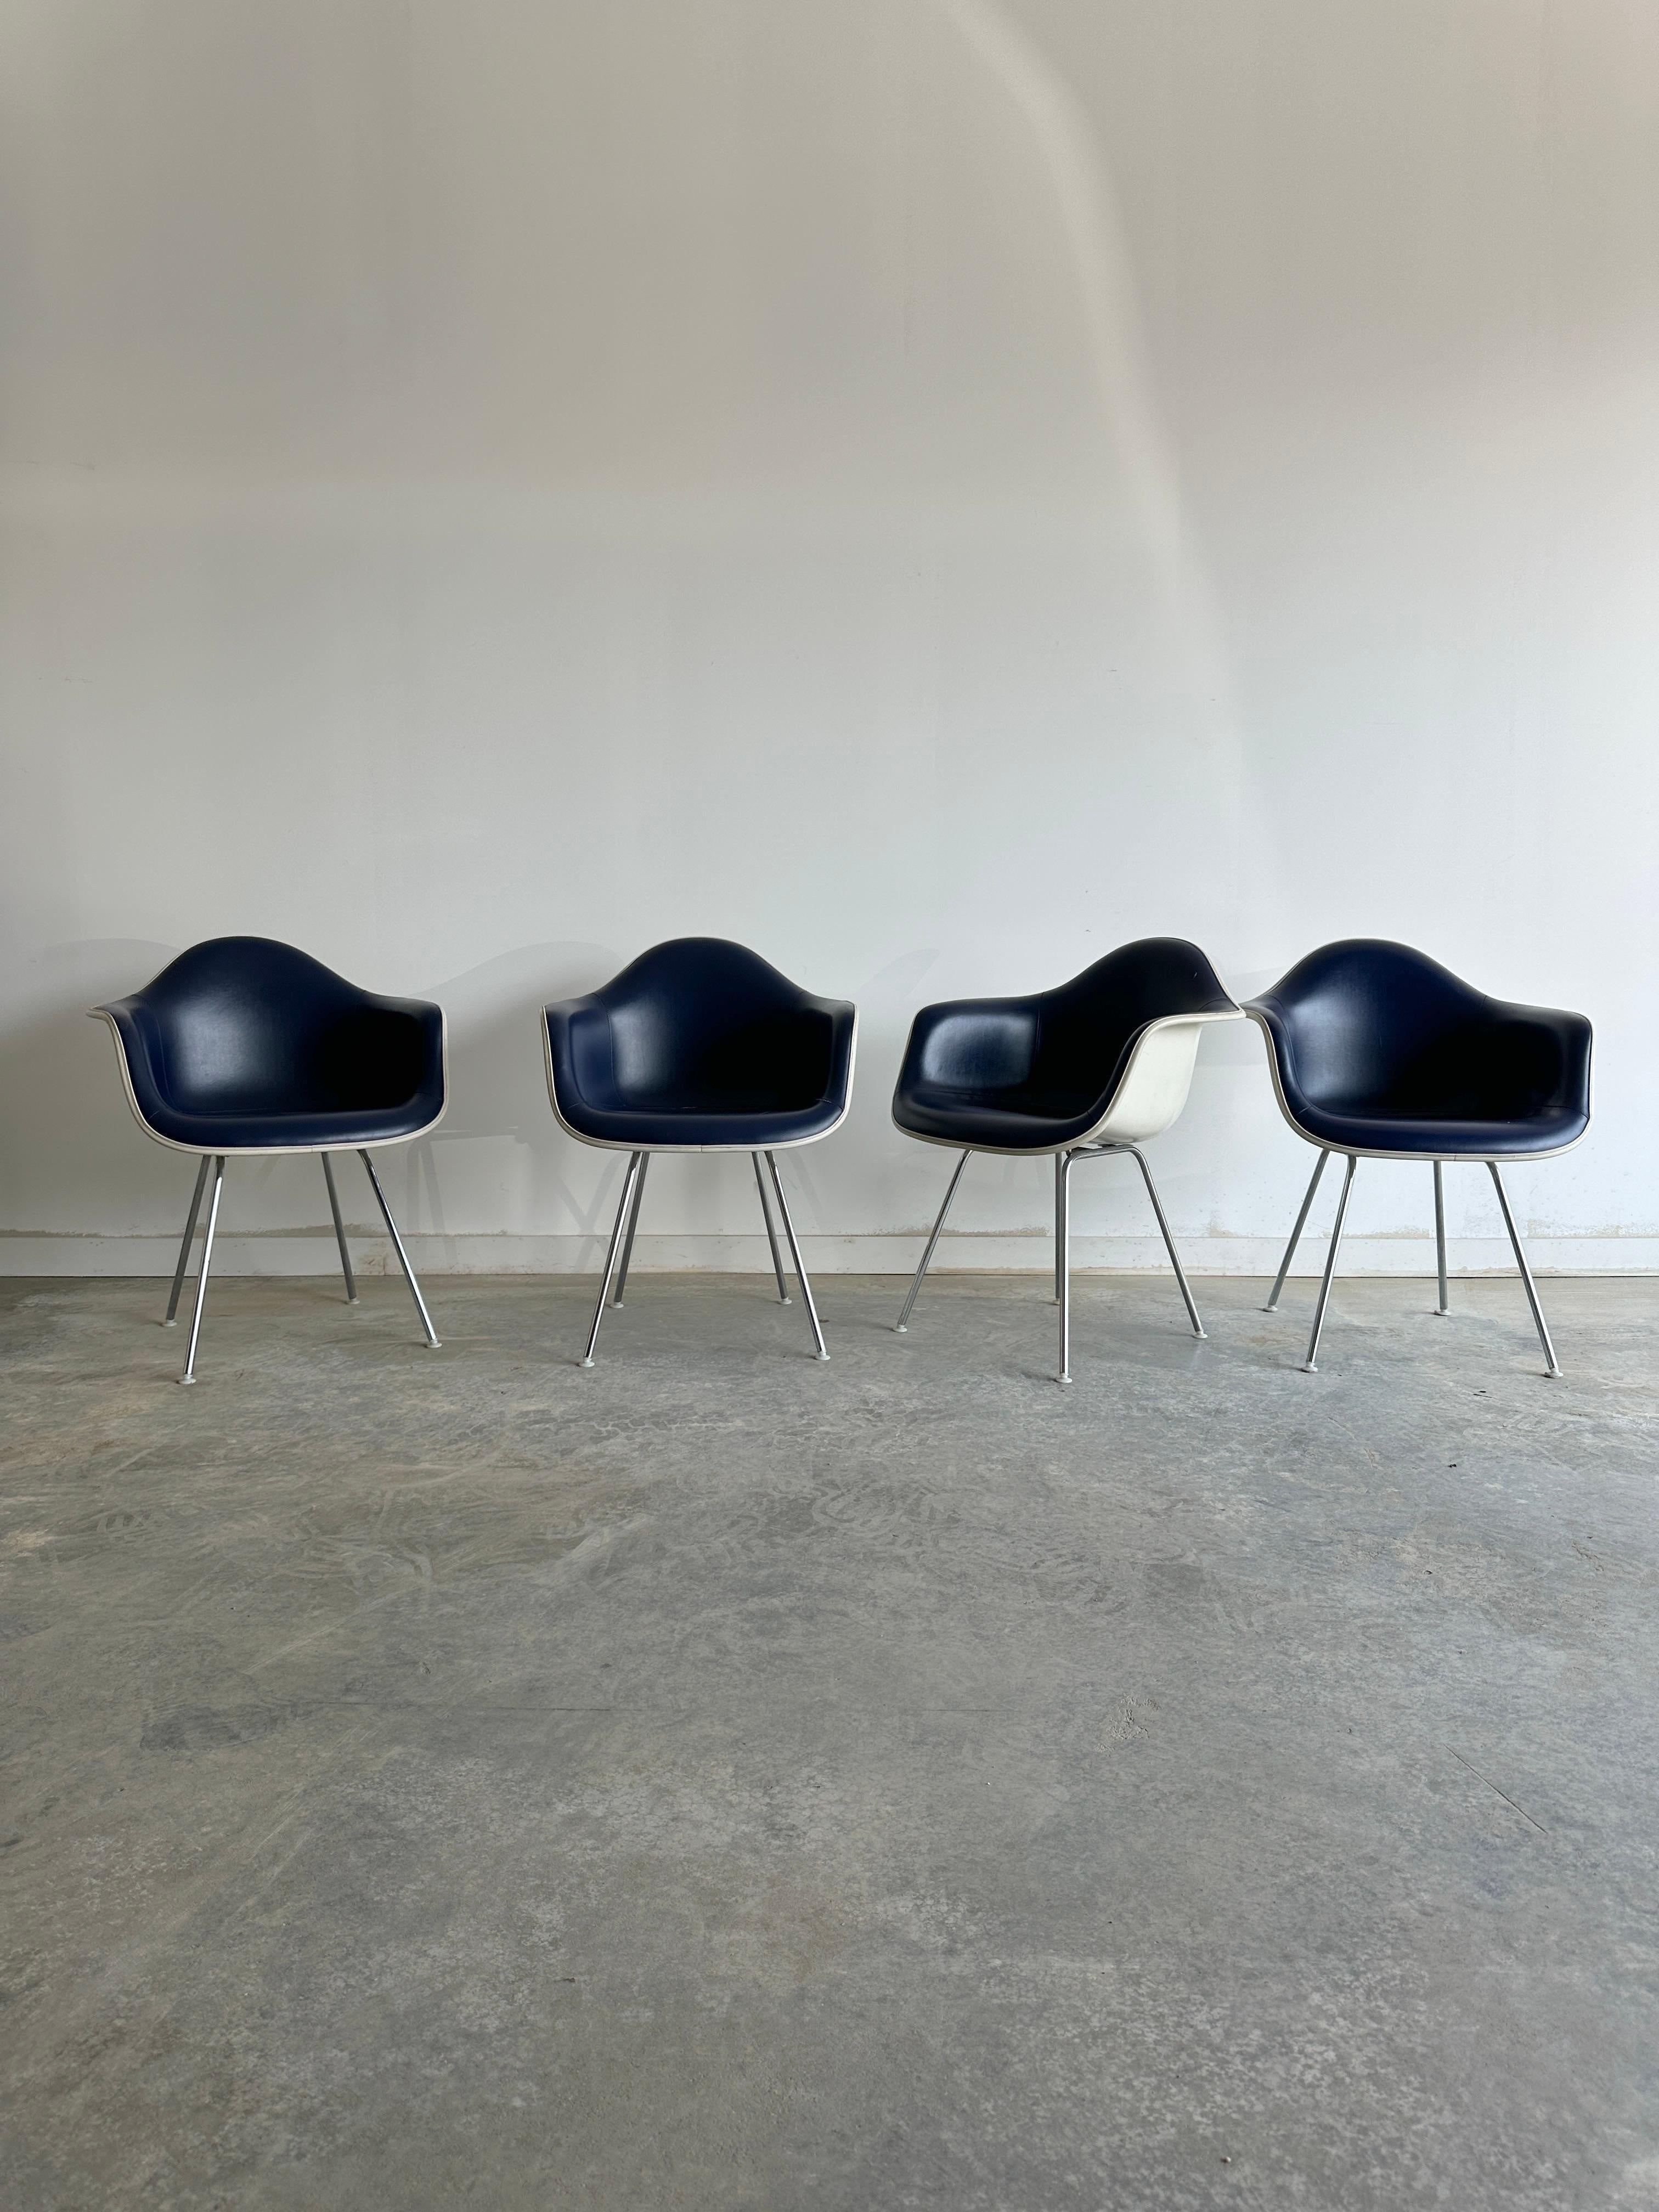 Four blue leather classic rope edge dax armchairs by Charles and Ray Eames for Herman Miller. These chairs were designed in the 1950s by the legendary American couple, who experimented with new materials and techniques to create innovative and